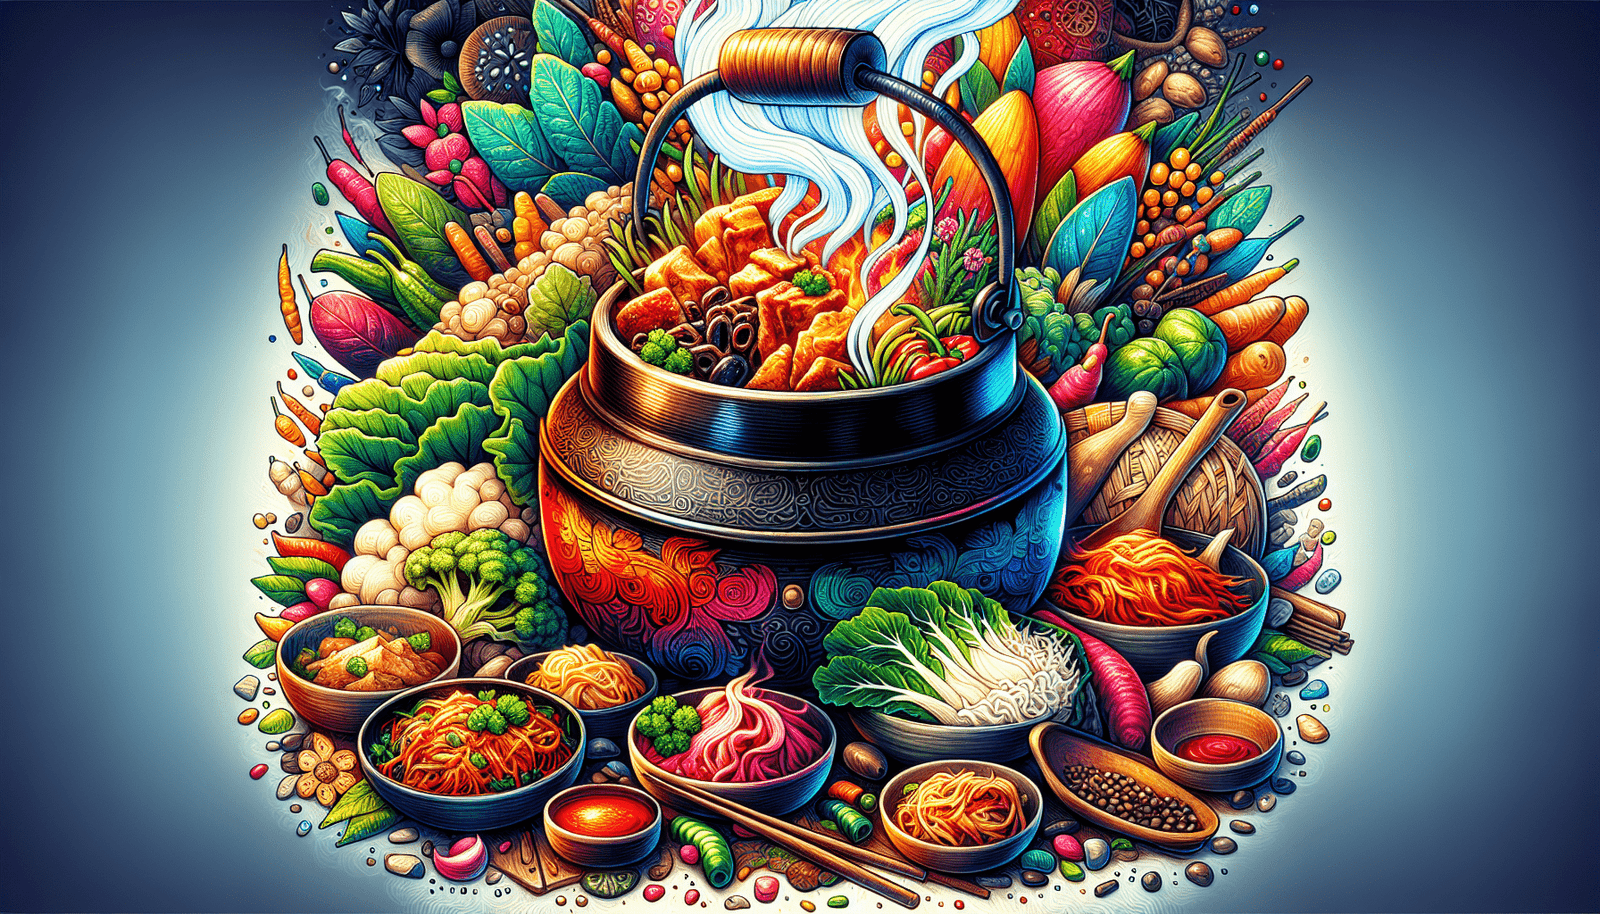 Can You Share Stories About The Origins Of Iconic Korean Dishes?